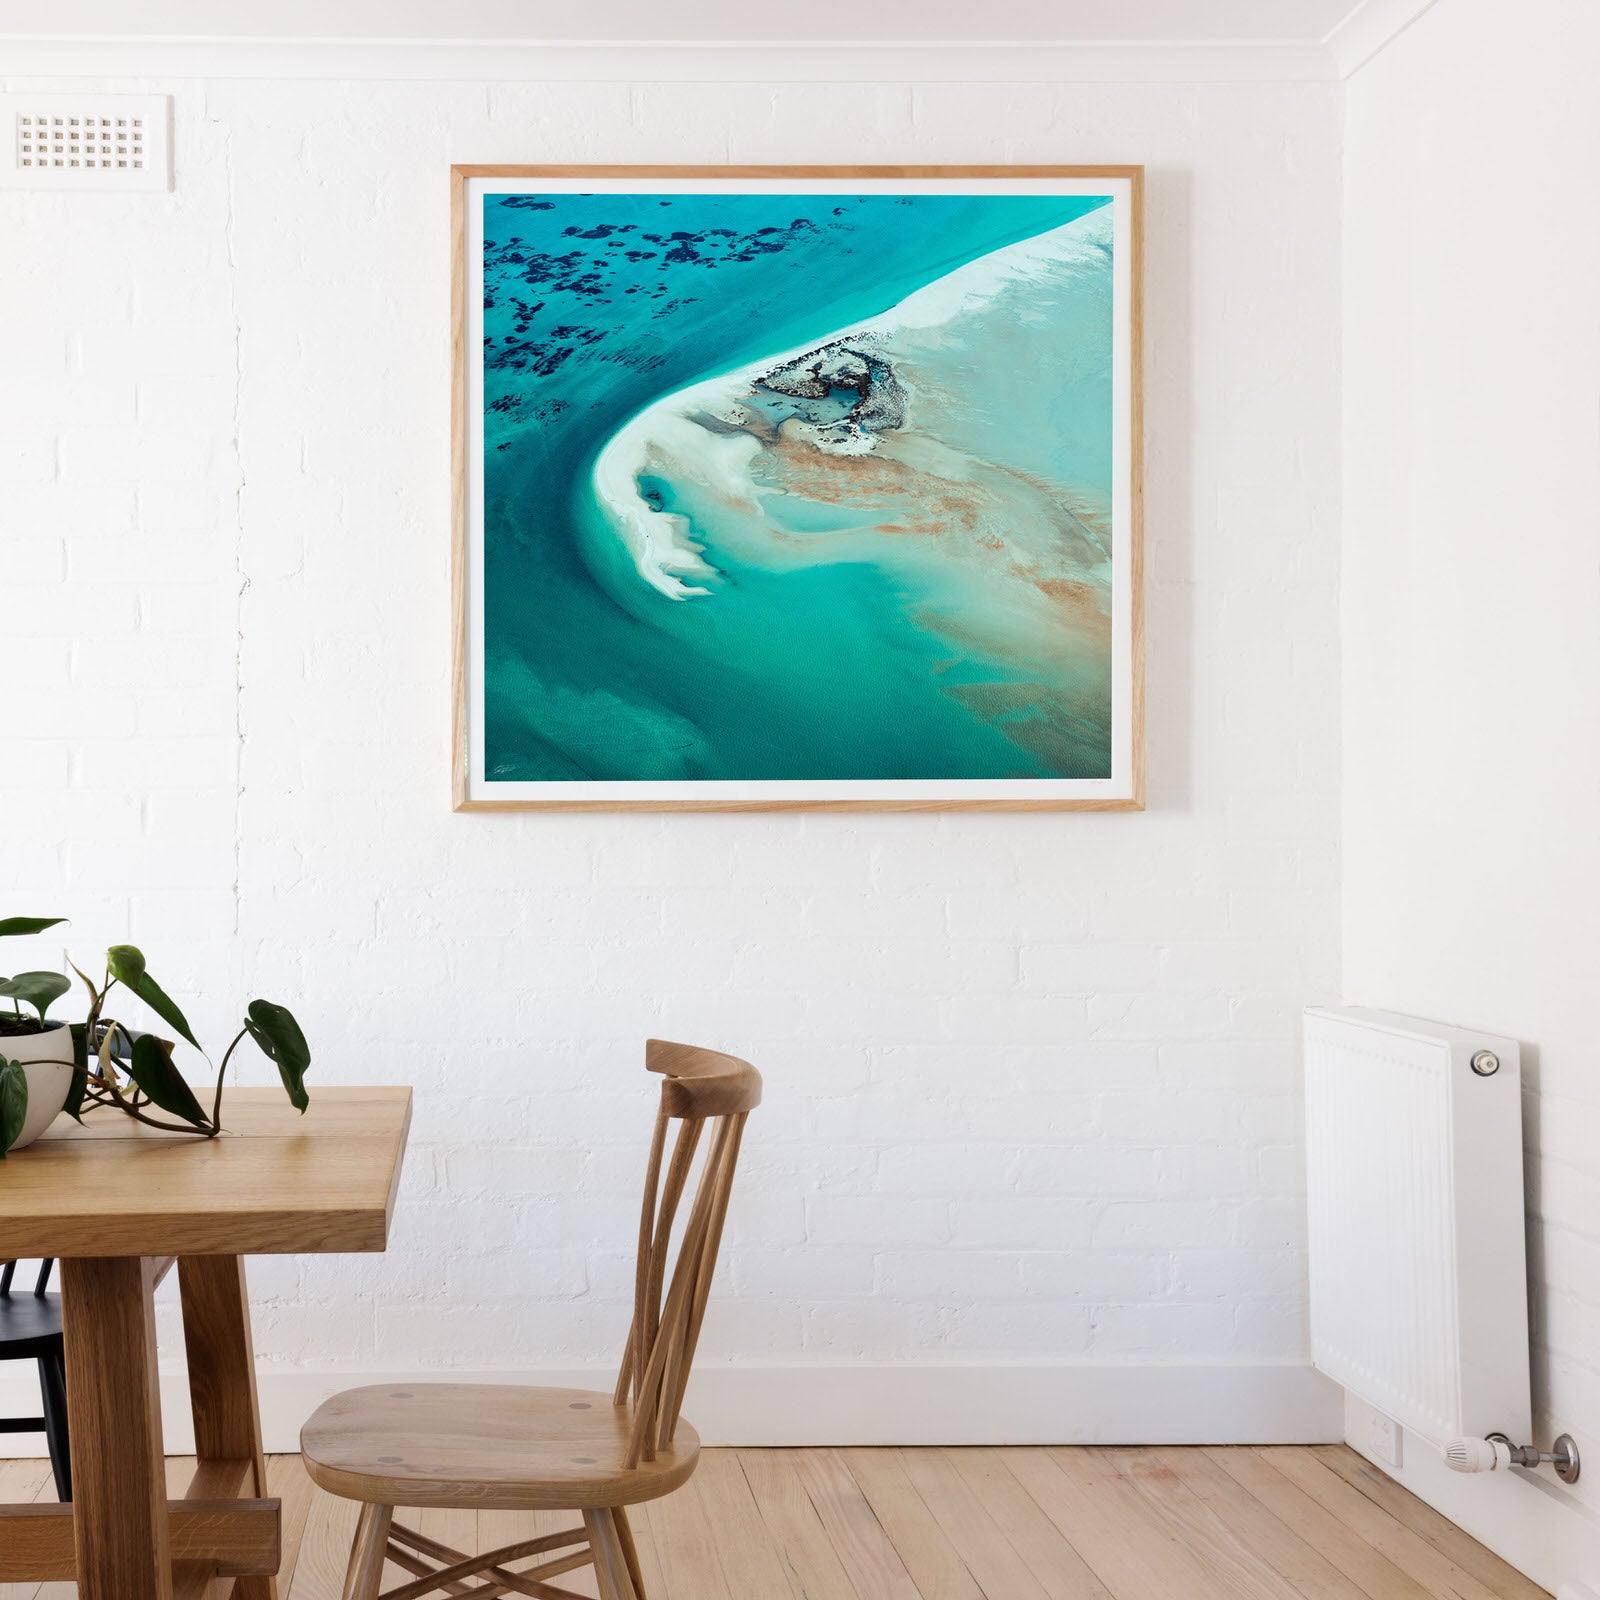 Square wall print framed in oak wooden fram Turqoise abstract aerial square wall art shark bay reef